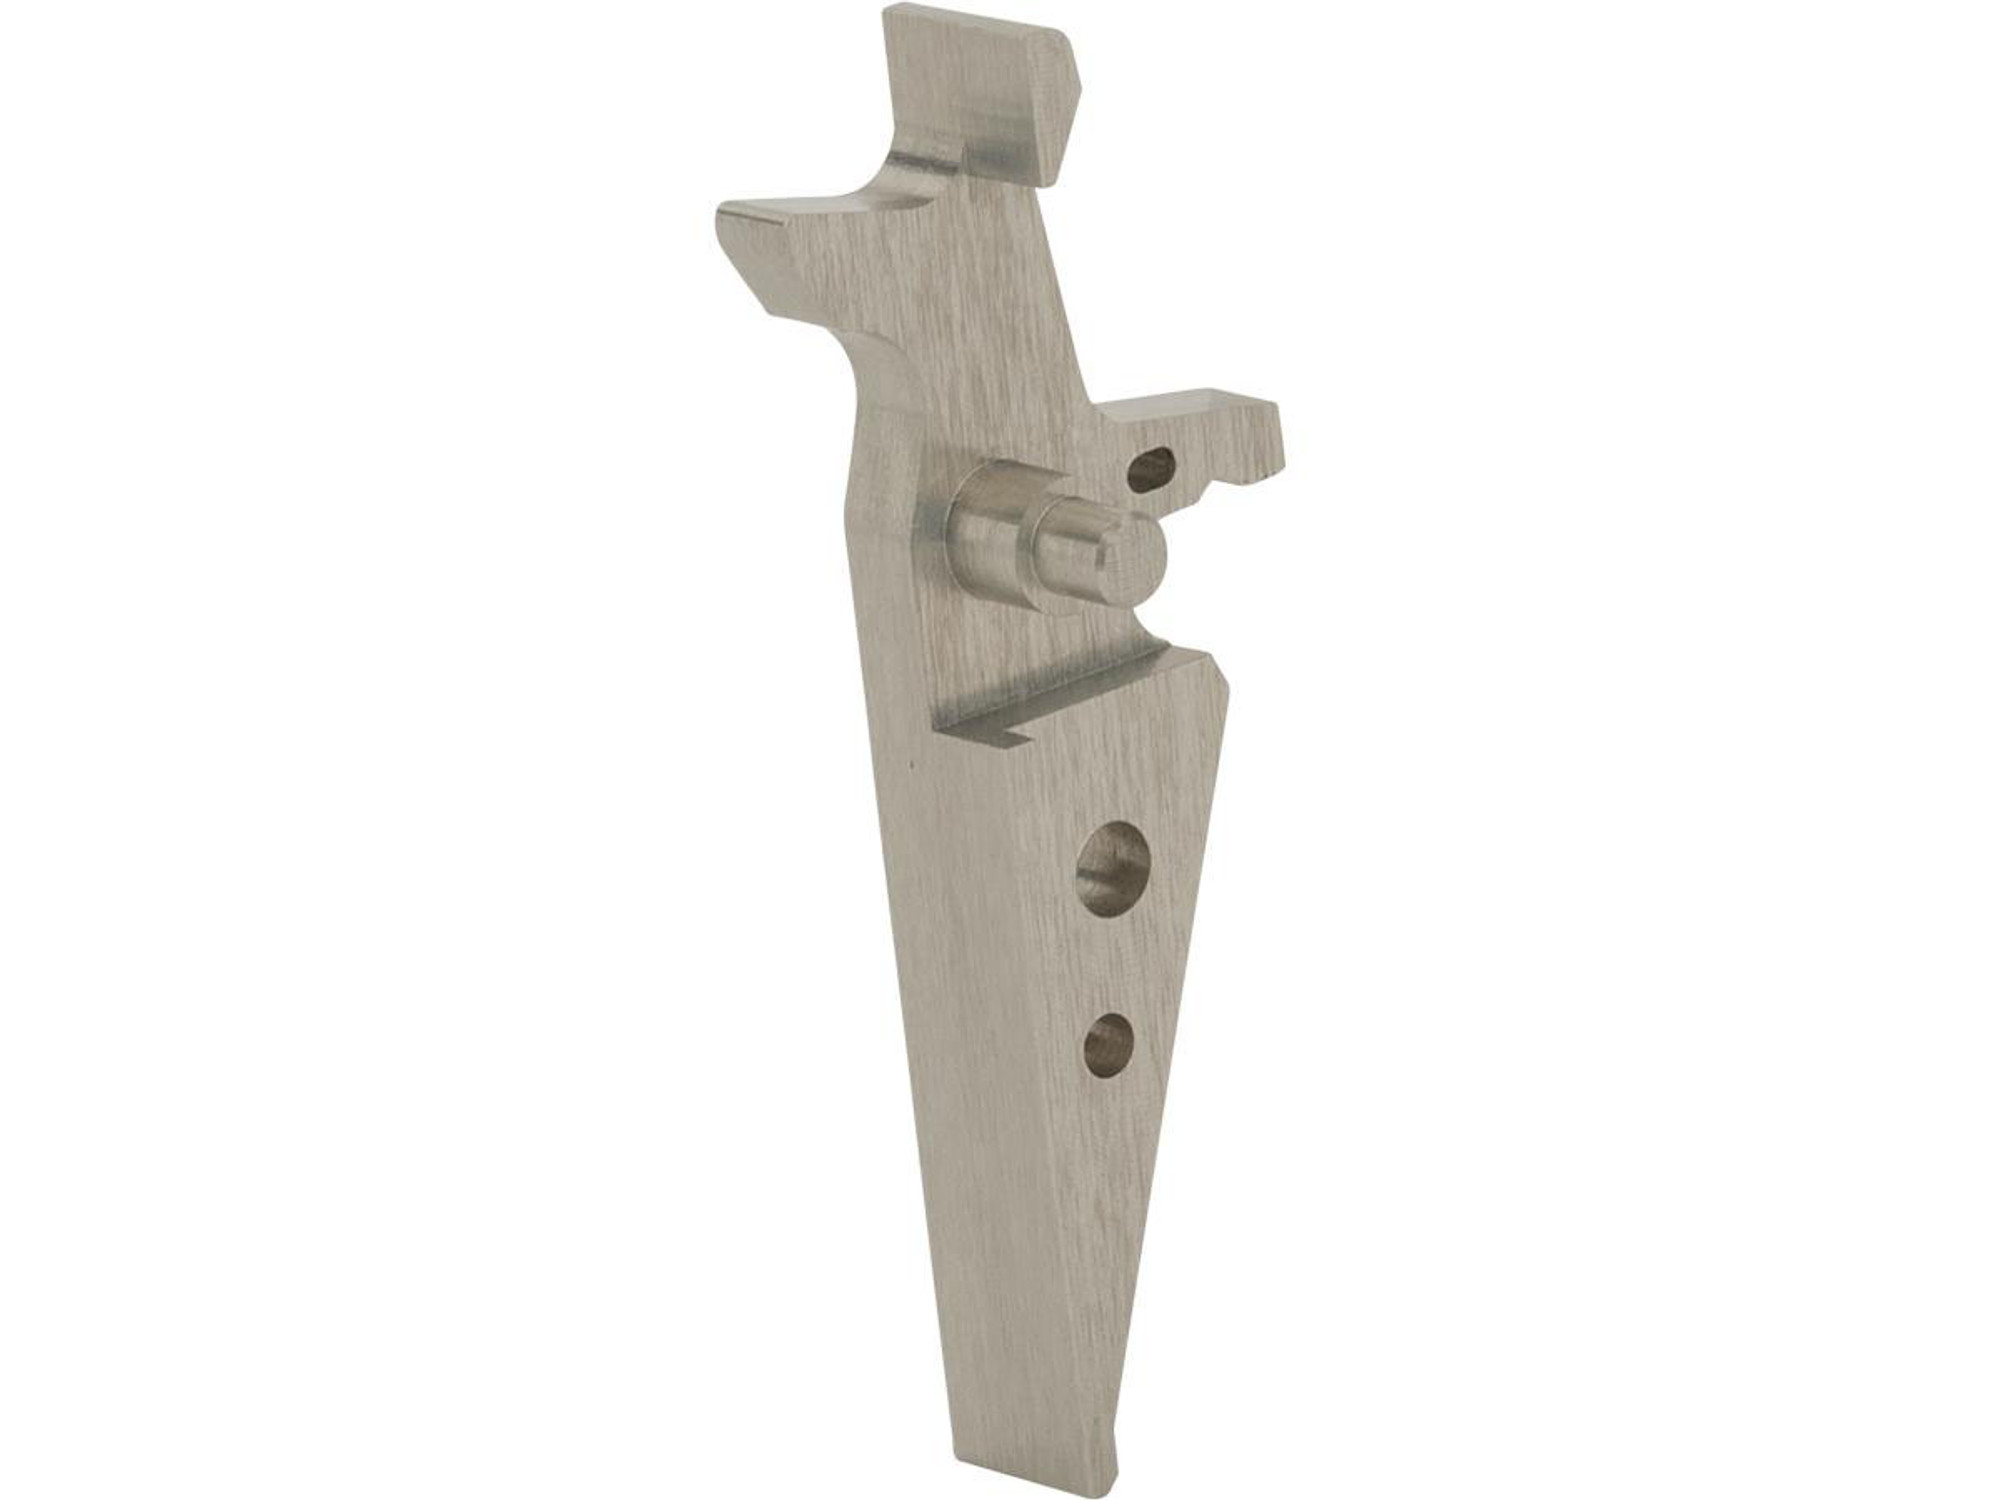 Retro Arms CNC Machined Aluminum Trigger for M4 / M16 Series AEG Rifles (Color: Silver / Style A)